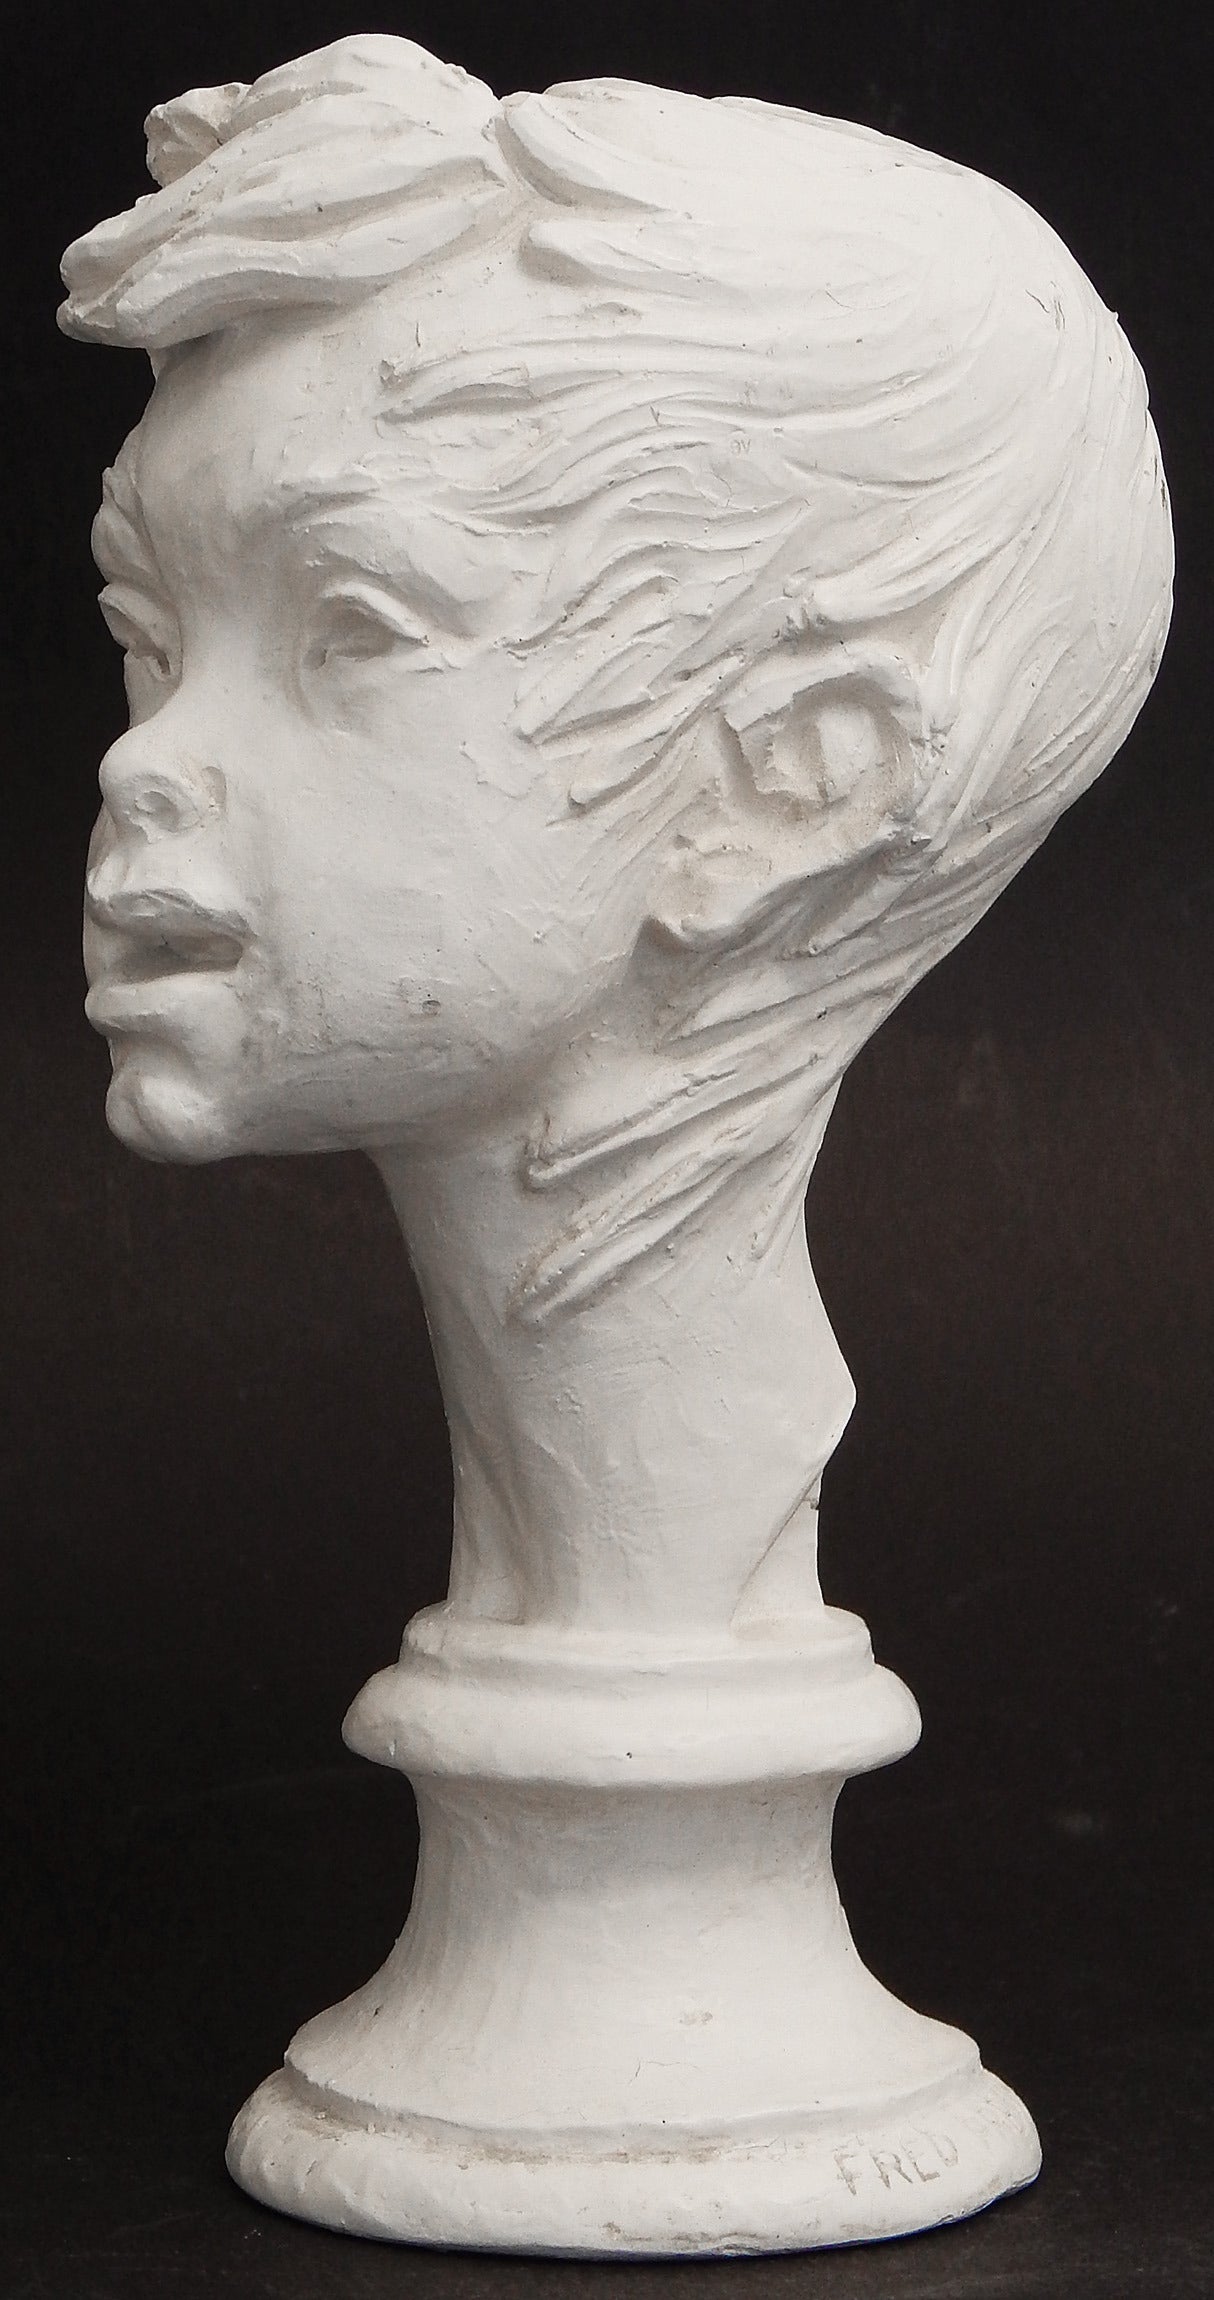 This depiction of a youthful figure, perhaps a street urchin from the alleys of New York, with his or her hair blowing wildly, is a rare or unique sculpture by Fred Press. Press was a kind of Renaissance Man in Mid-Century design, creating new